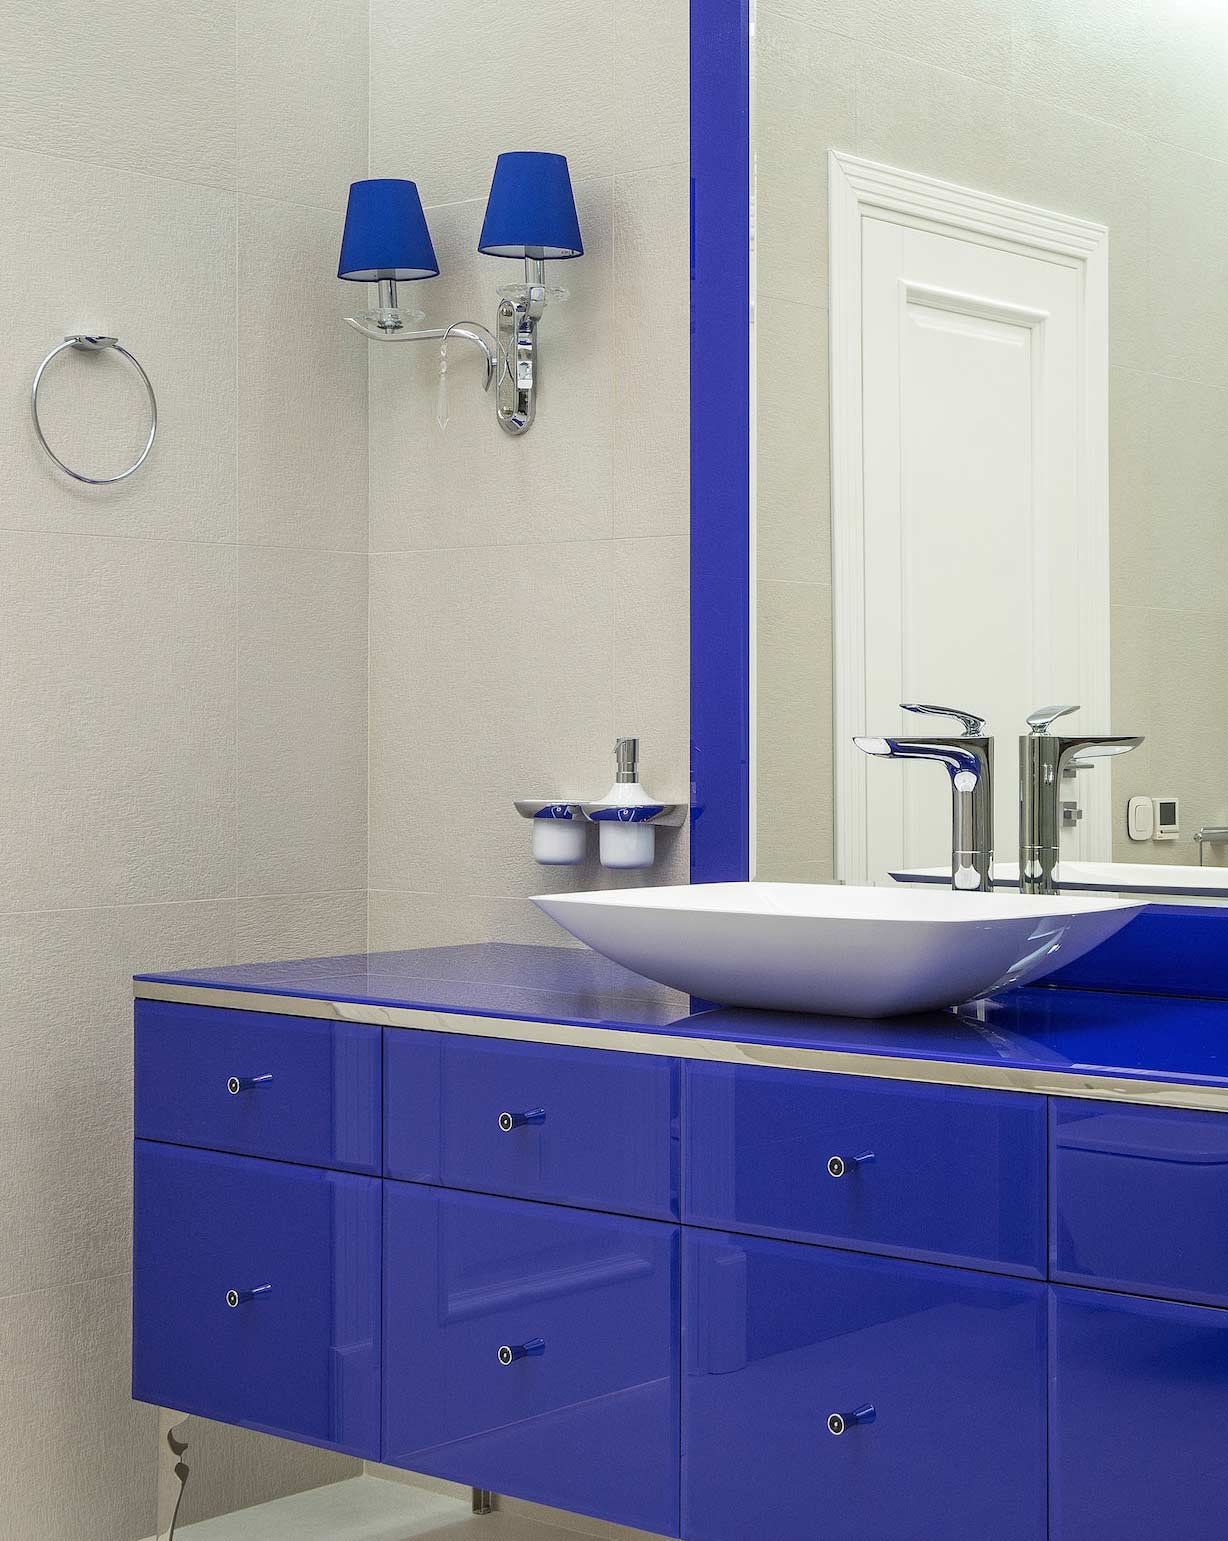 Bathroom with matching cabinet and lampshade color